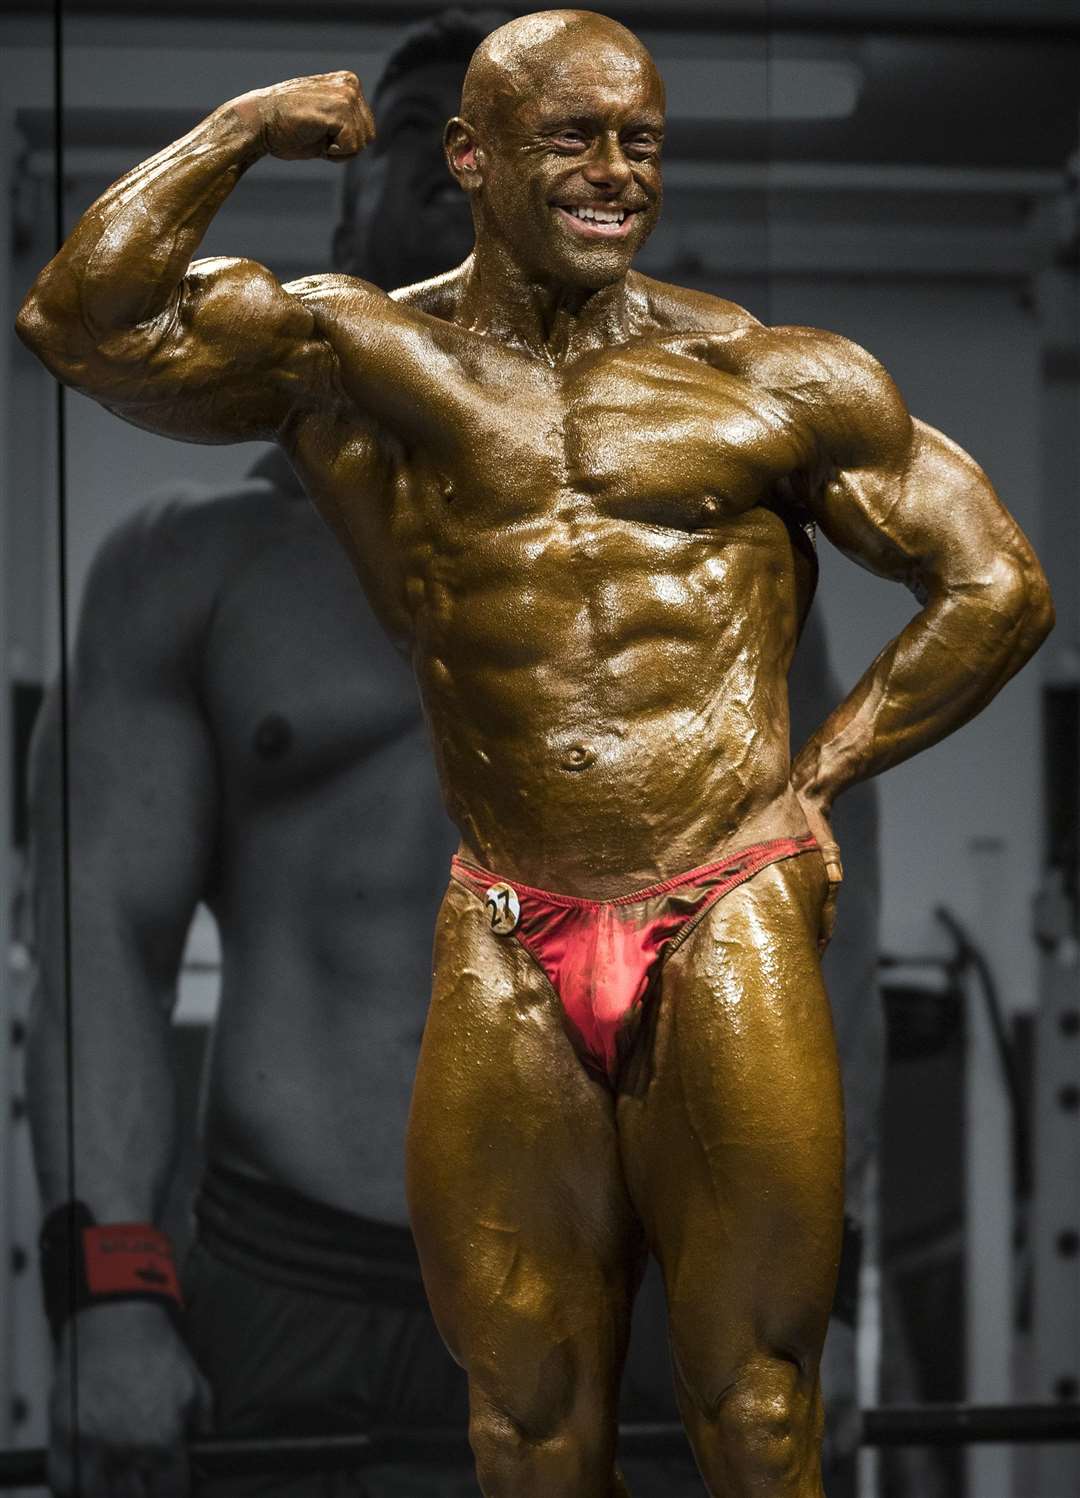 Kev Stewart has been taking part in bodybuilder competitions for four years.